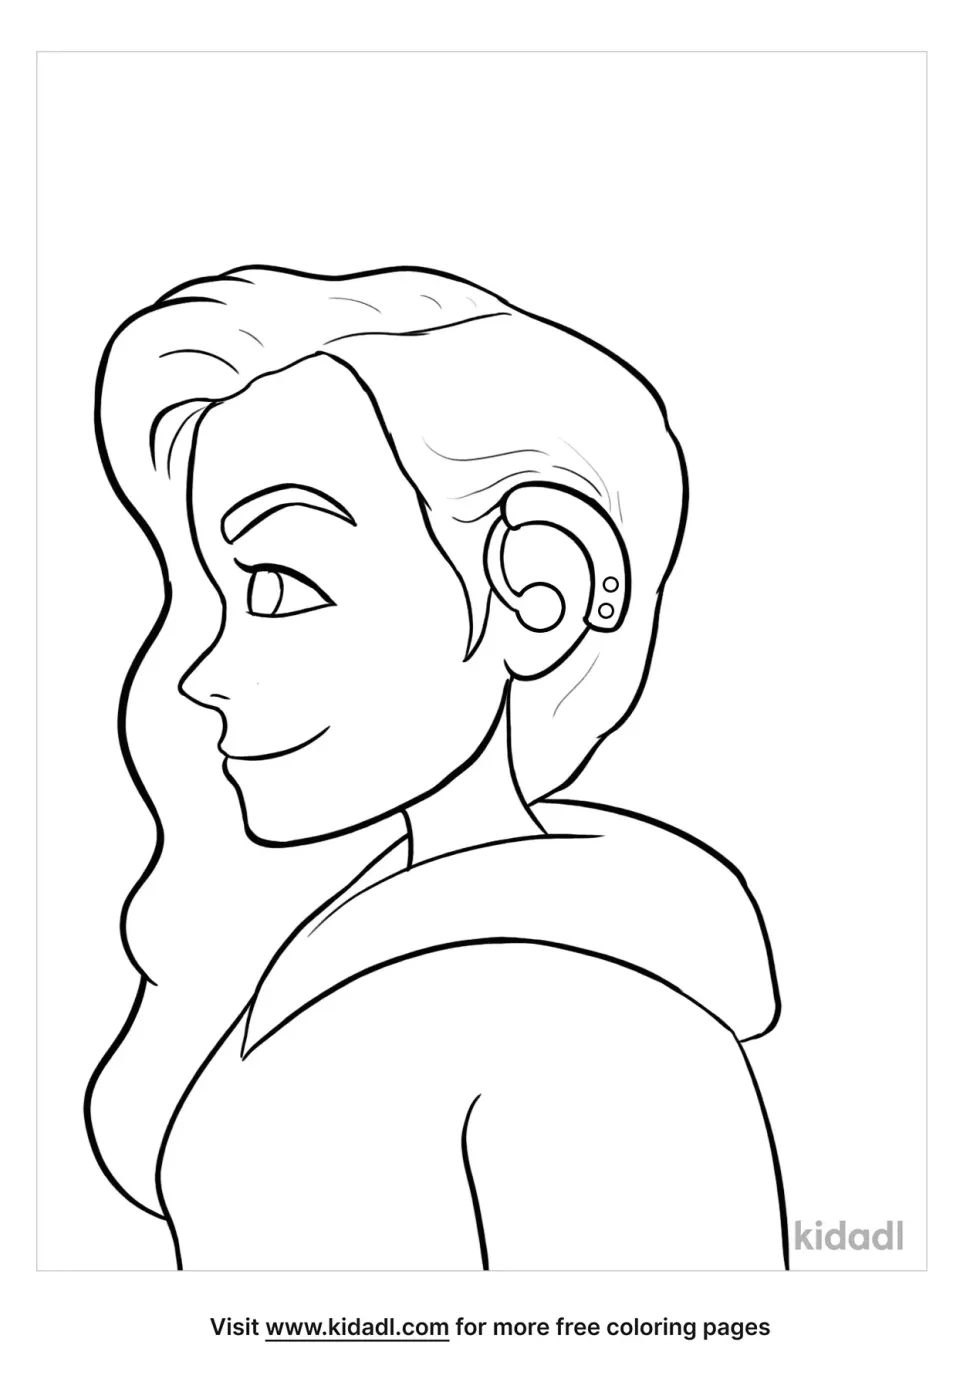 Child With Hearing Aids Coloring Page